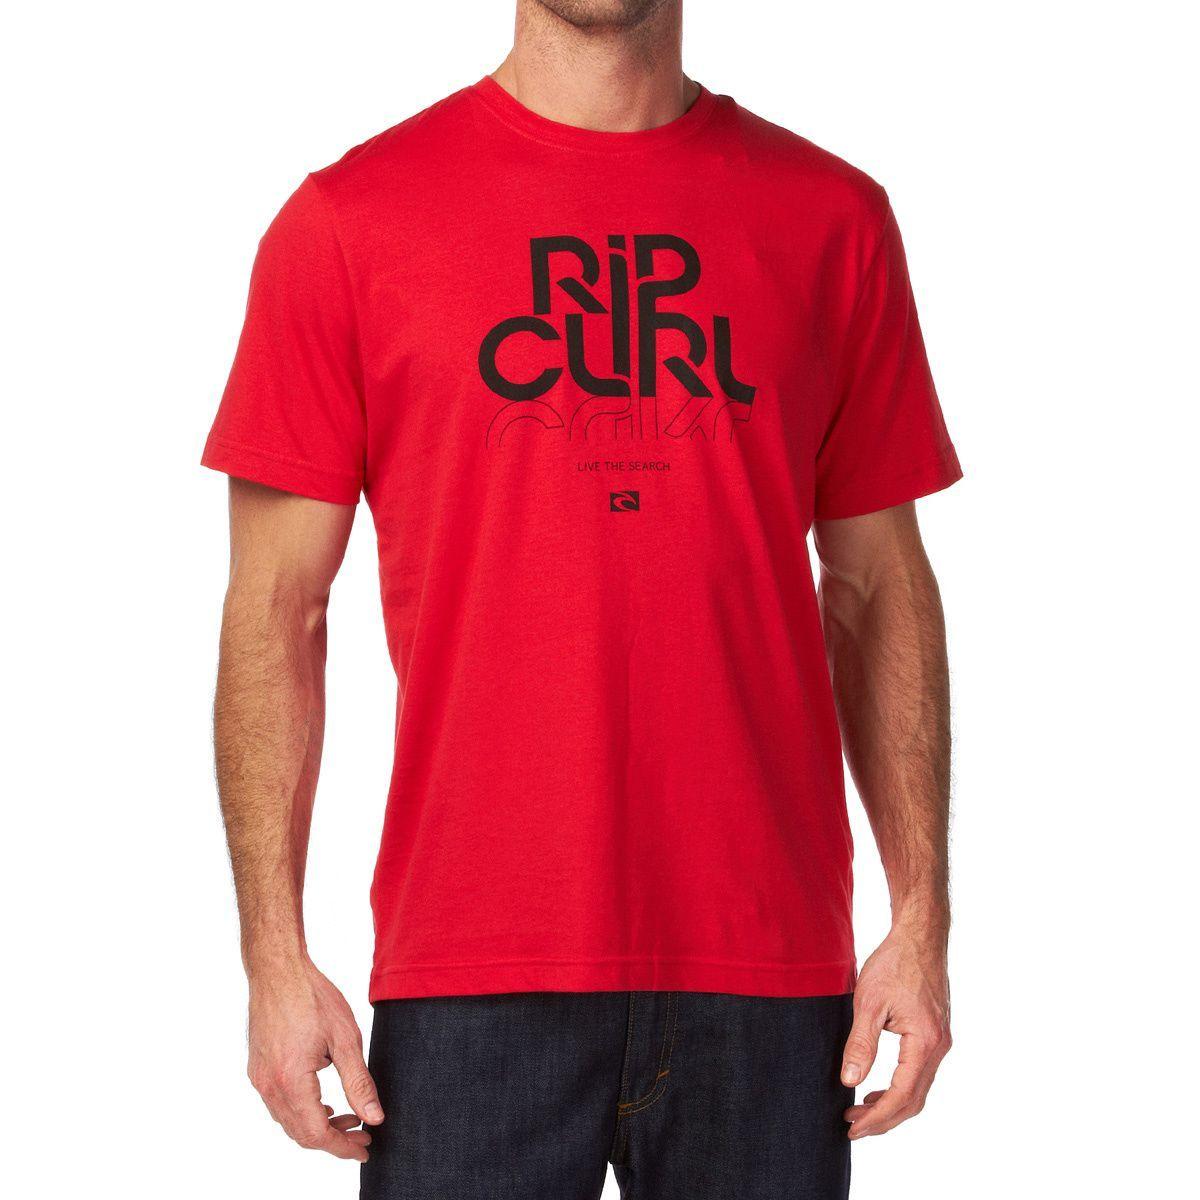 Red Curl Logo - Rip Curl Logo T Shirt. Free Delivery Options On All Orders